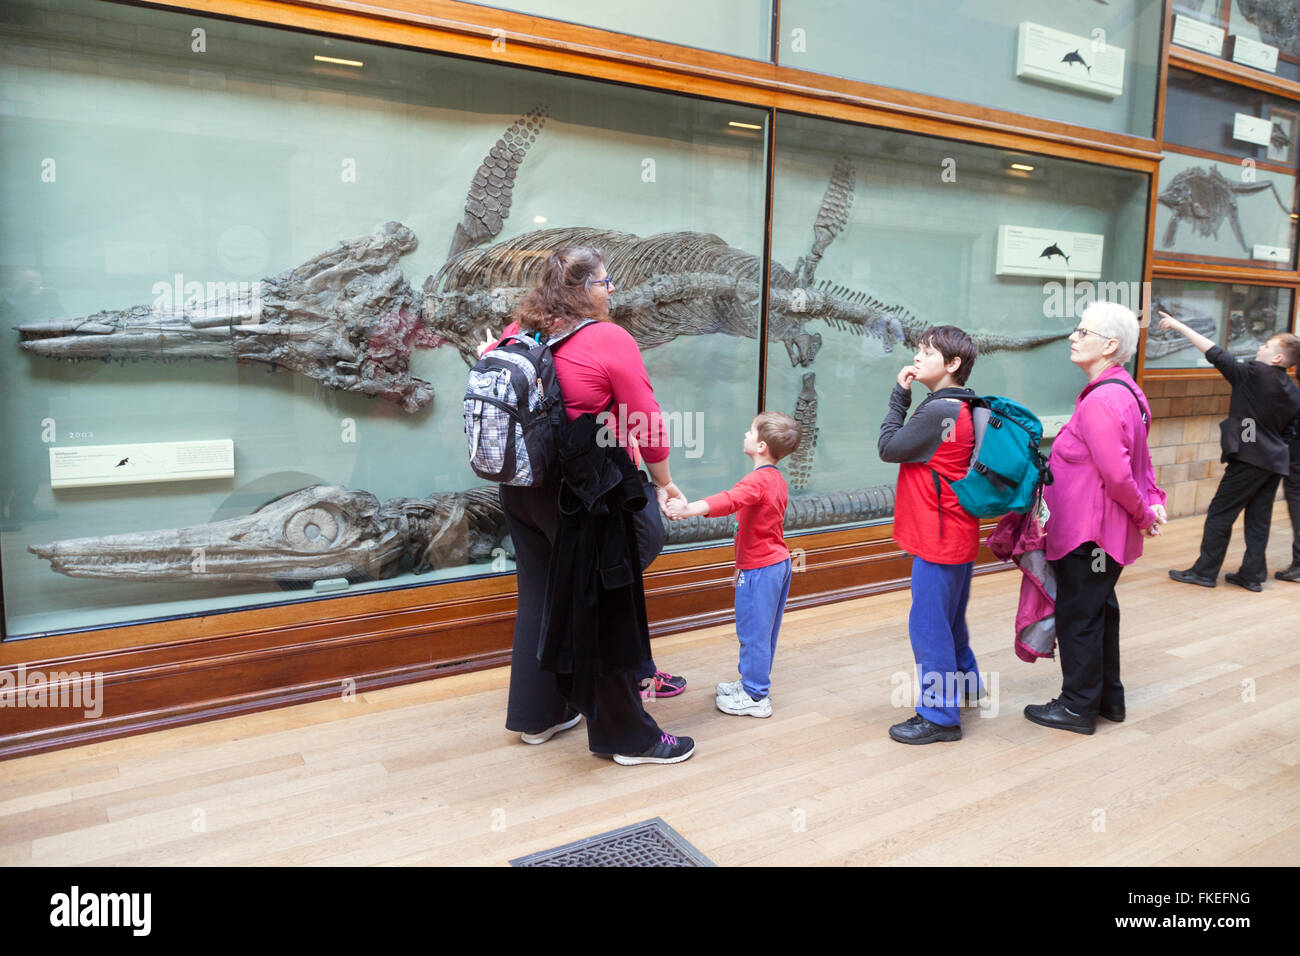 A family with children looking at a fossil Pleiosaur dinosaur, The Natural History Museum, London UK Stock Photo